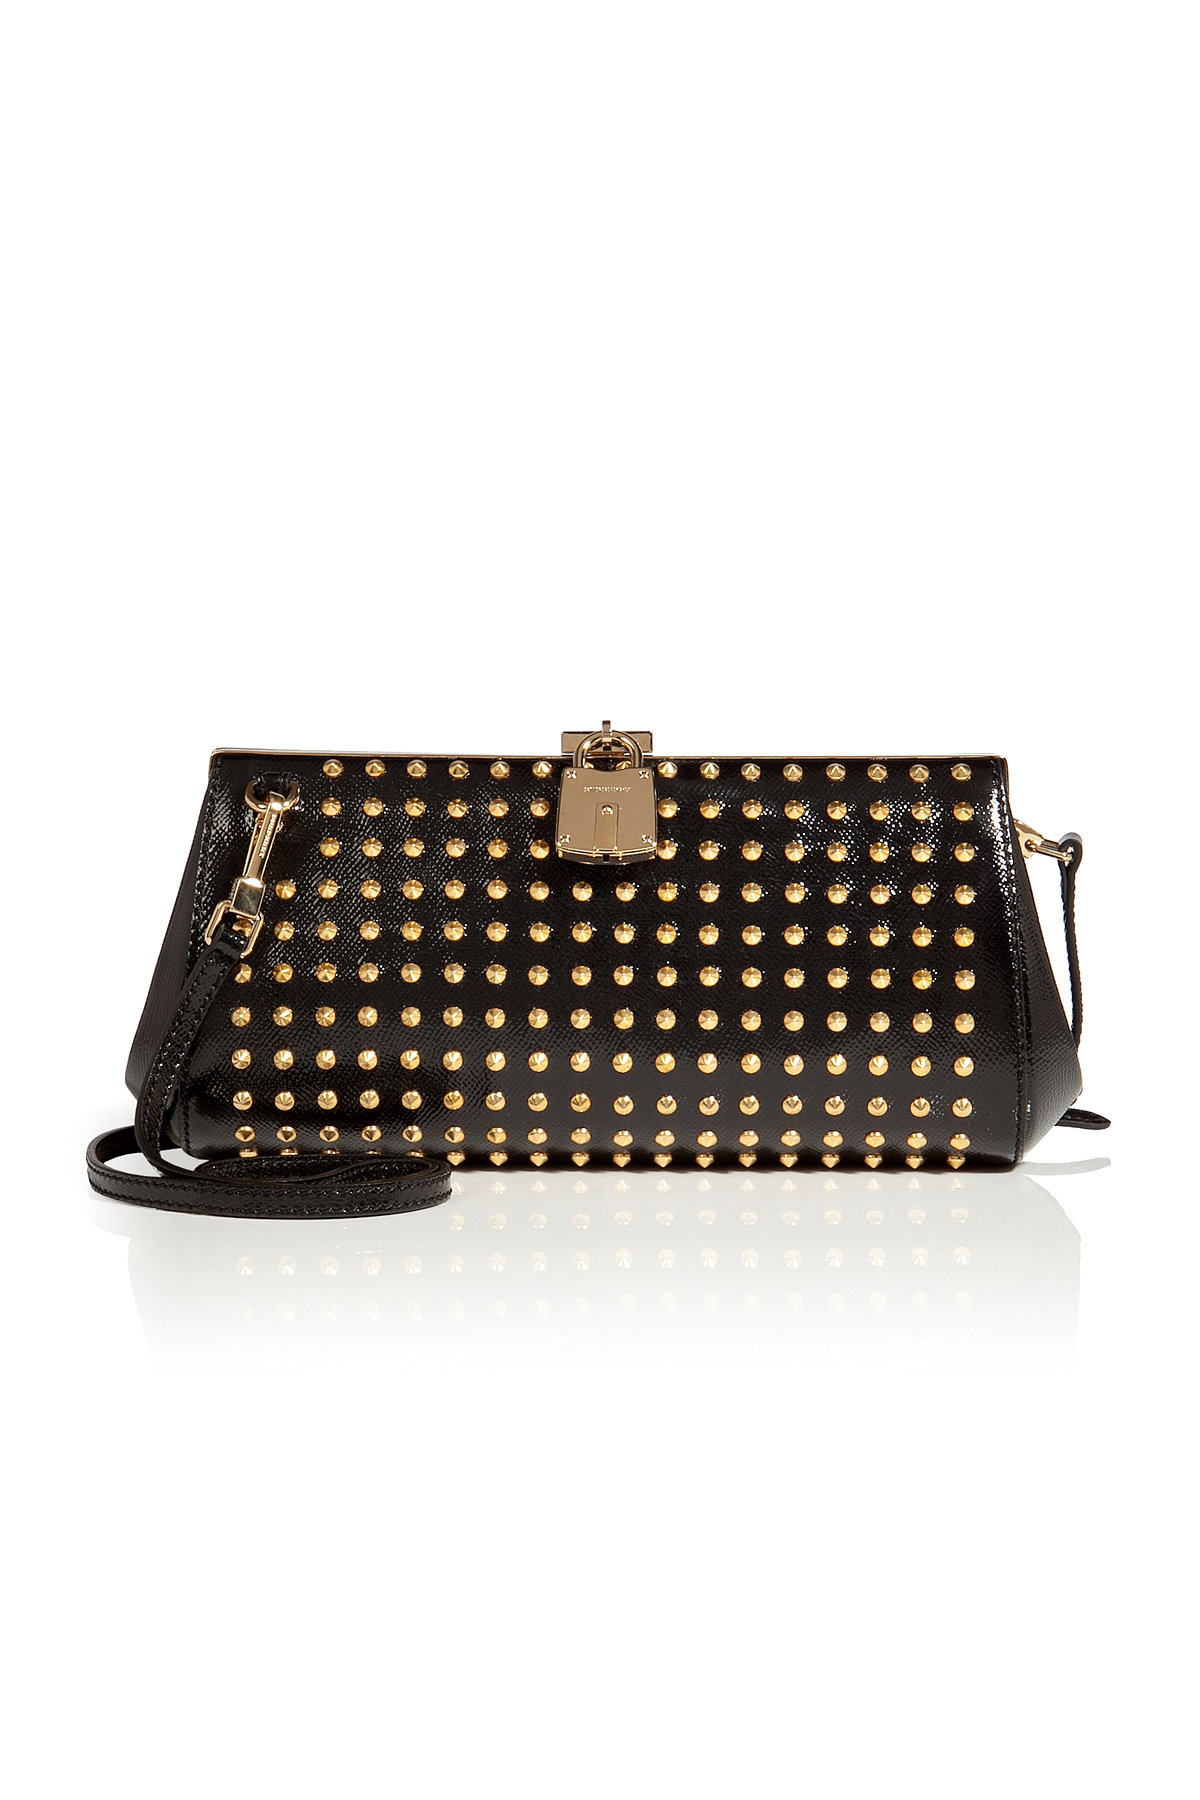 Burberry Studded Leather Clutch in Black in Brown | Lyst